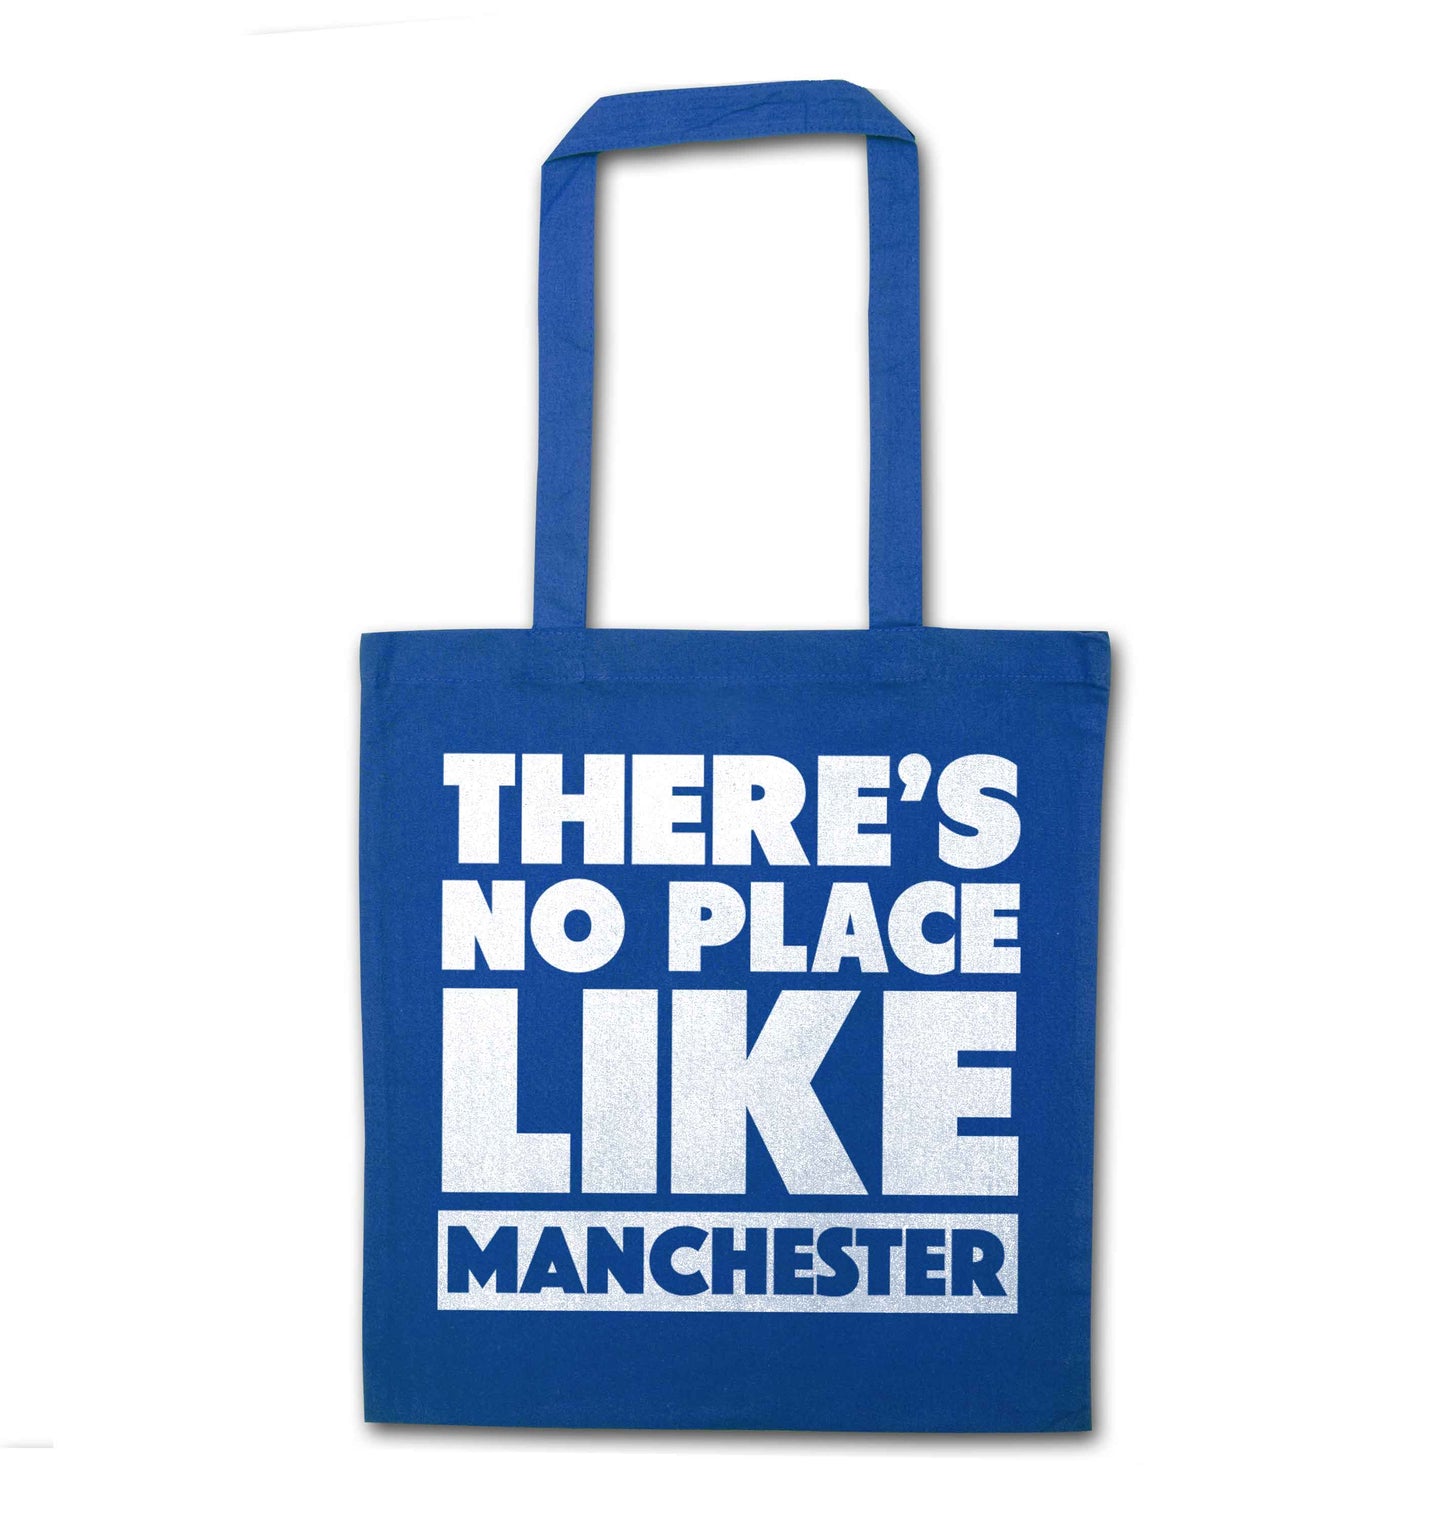 There's no place like Manchester blue tote bag